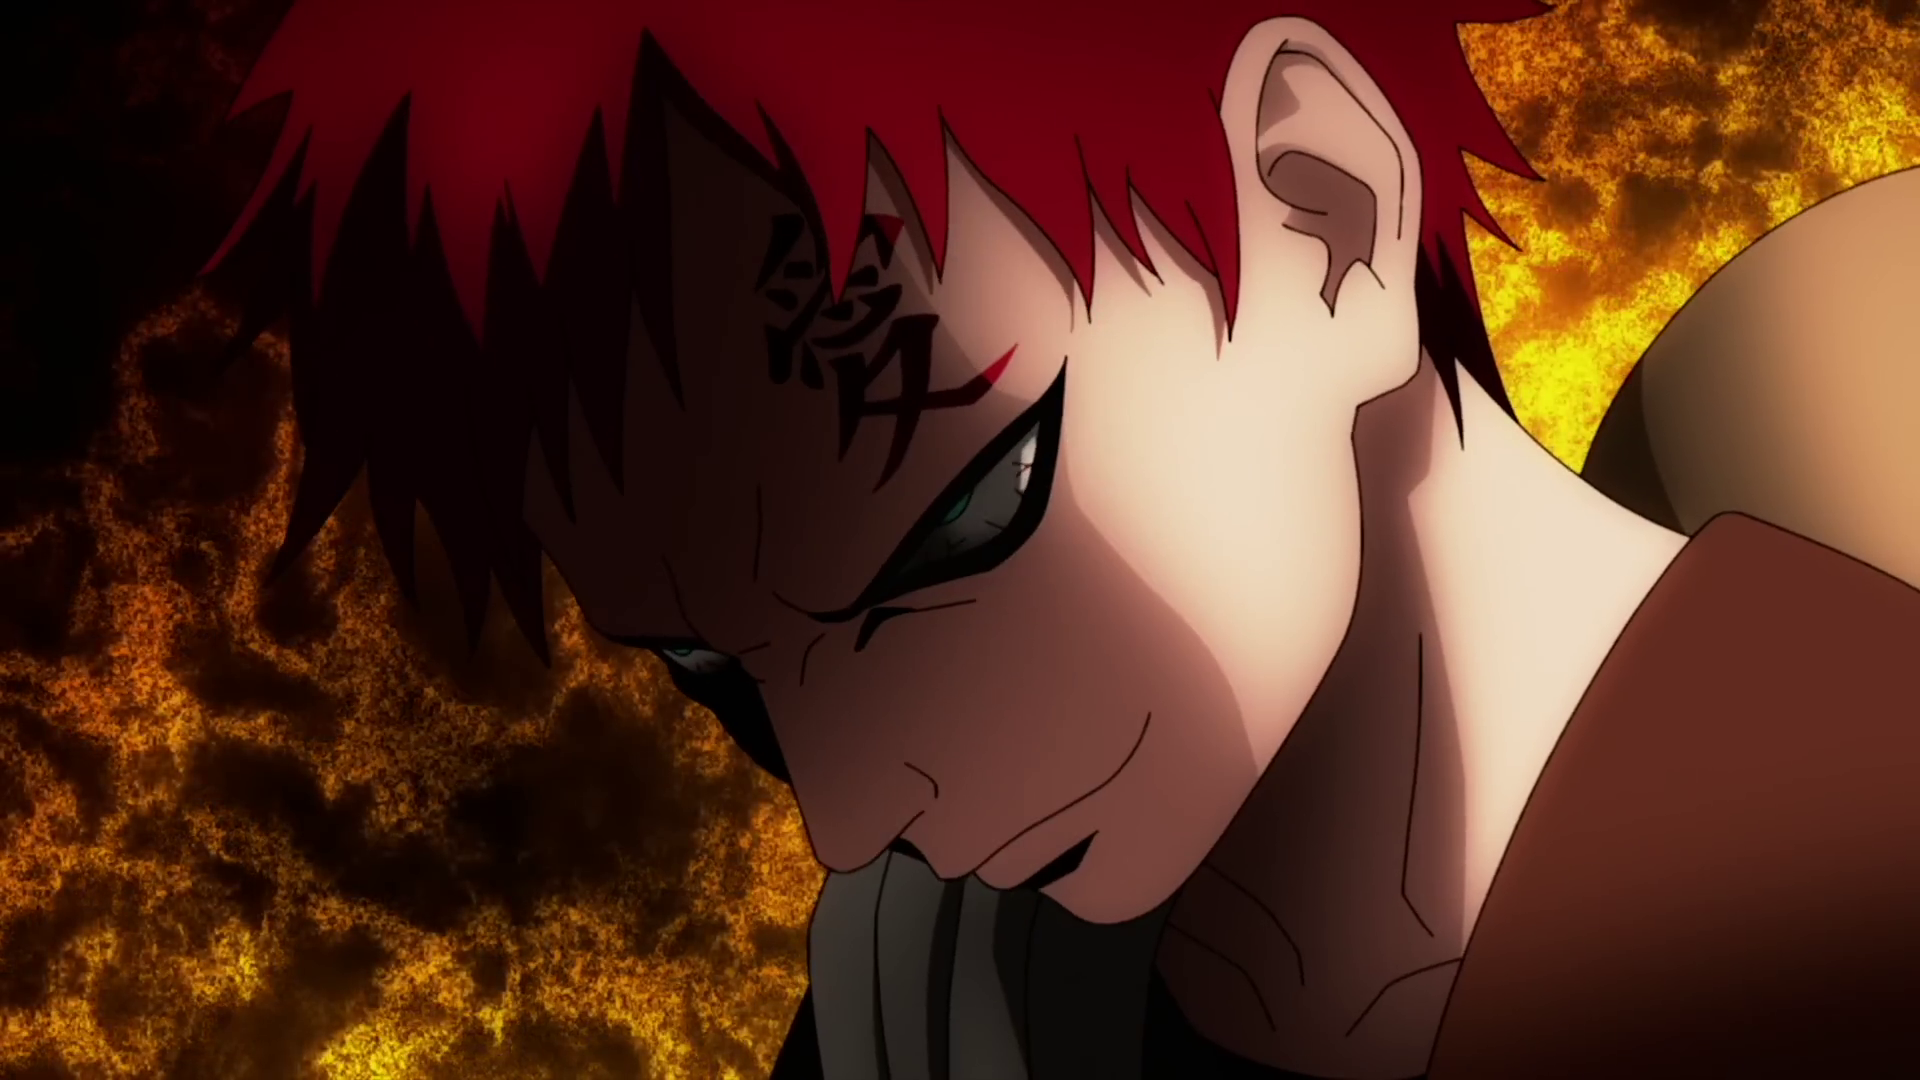 What Does Gaara's Tattoo Mean in 'Naruto?